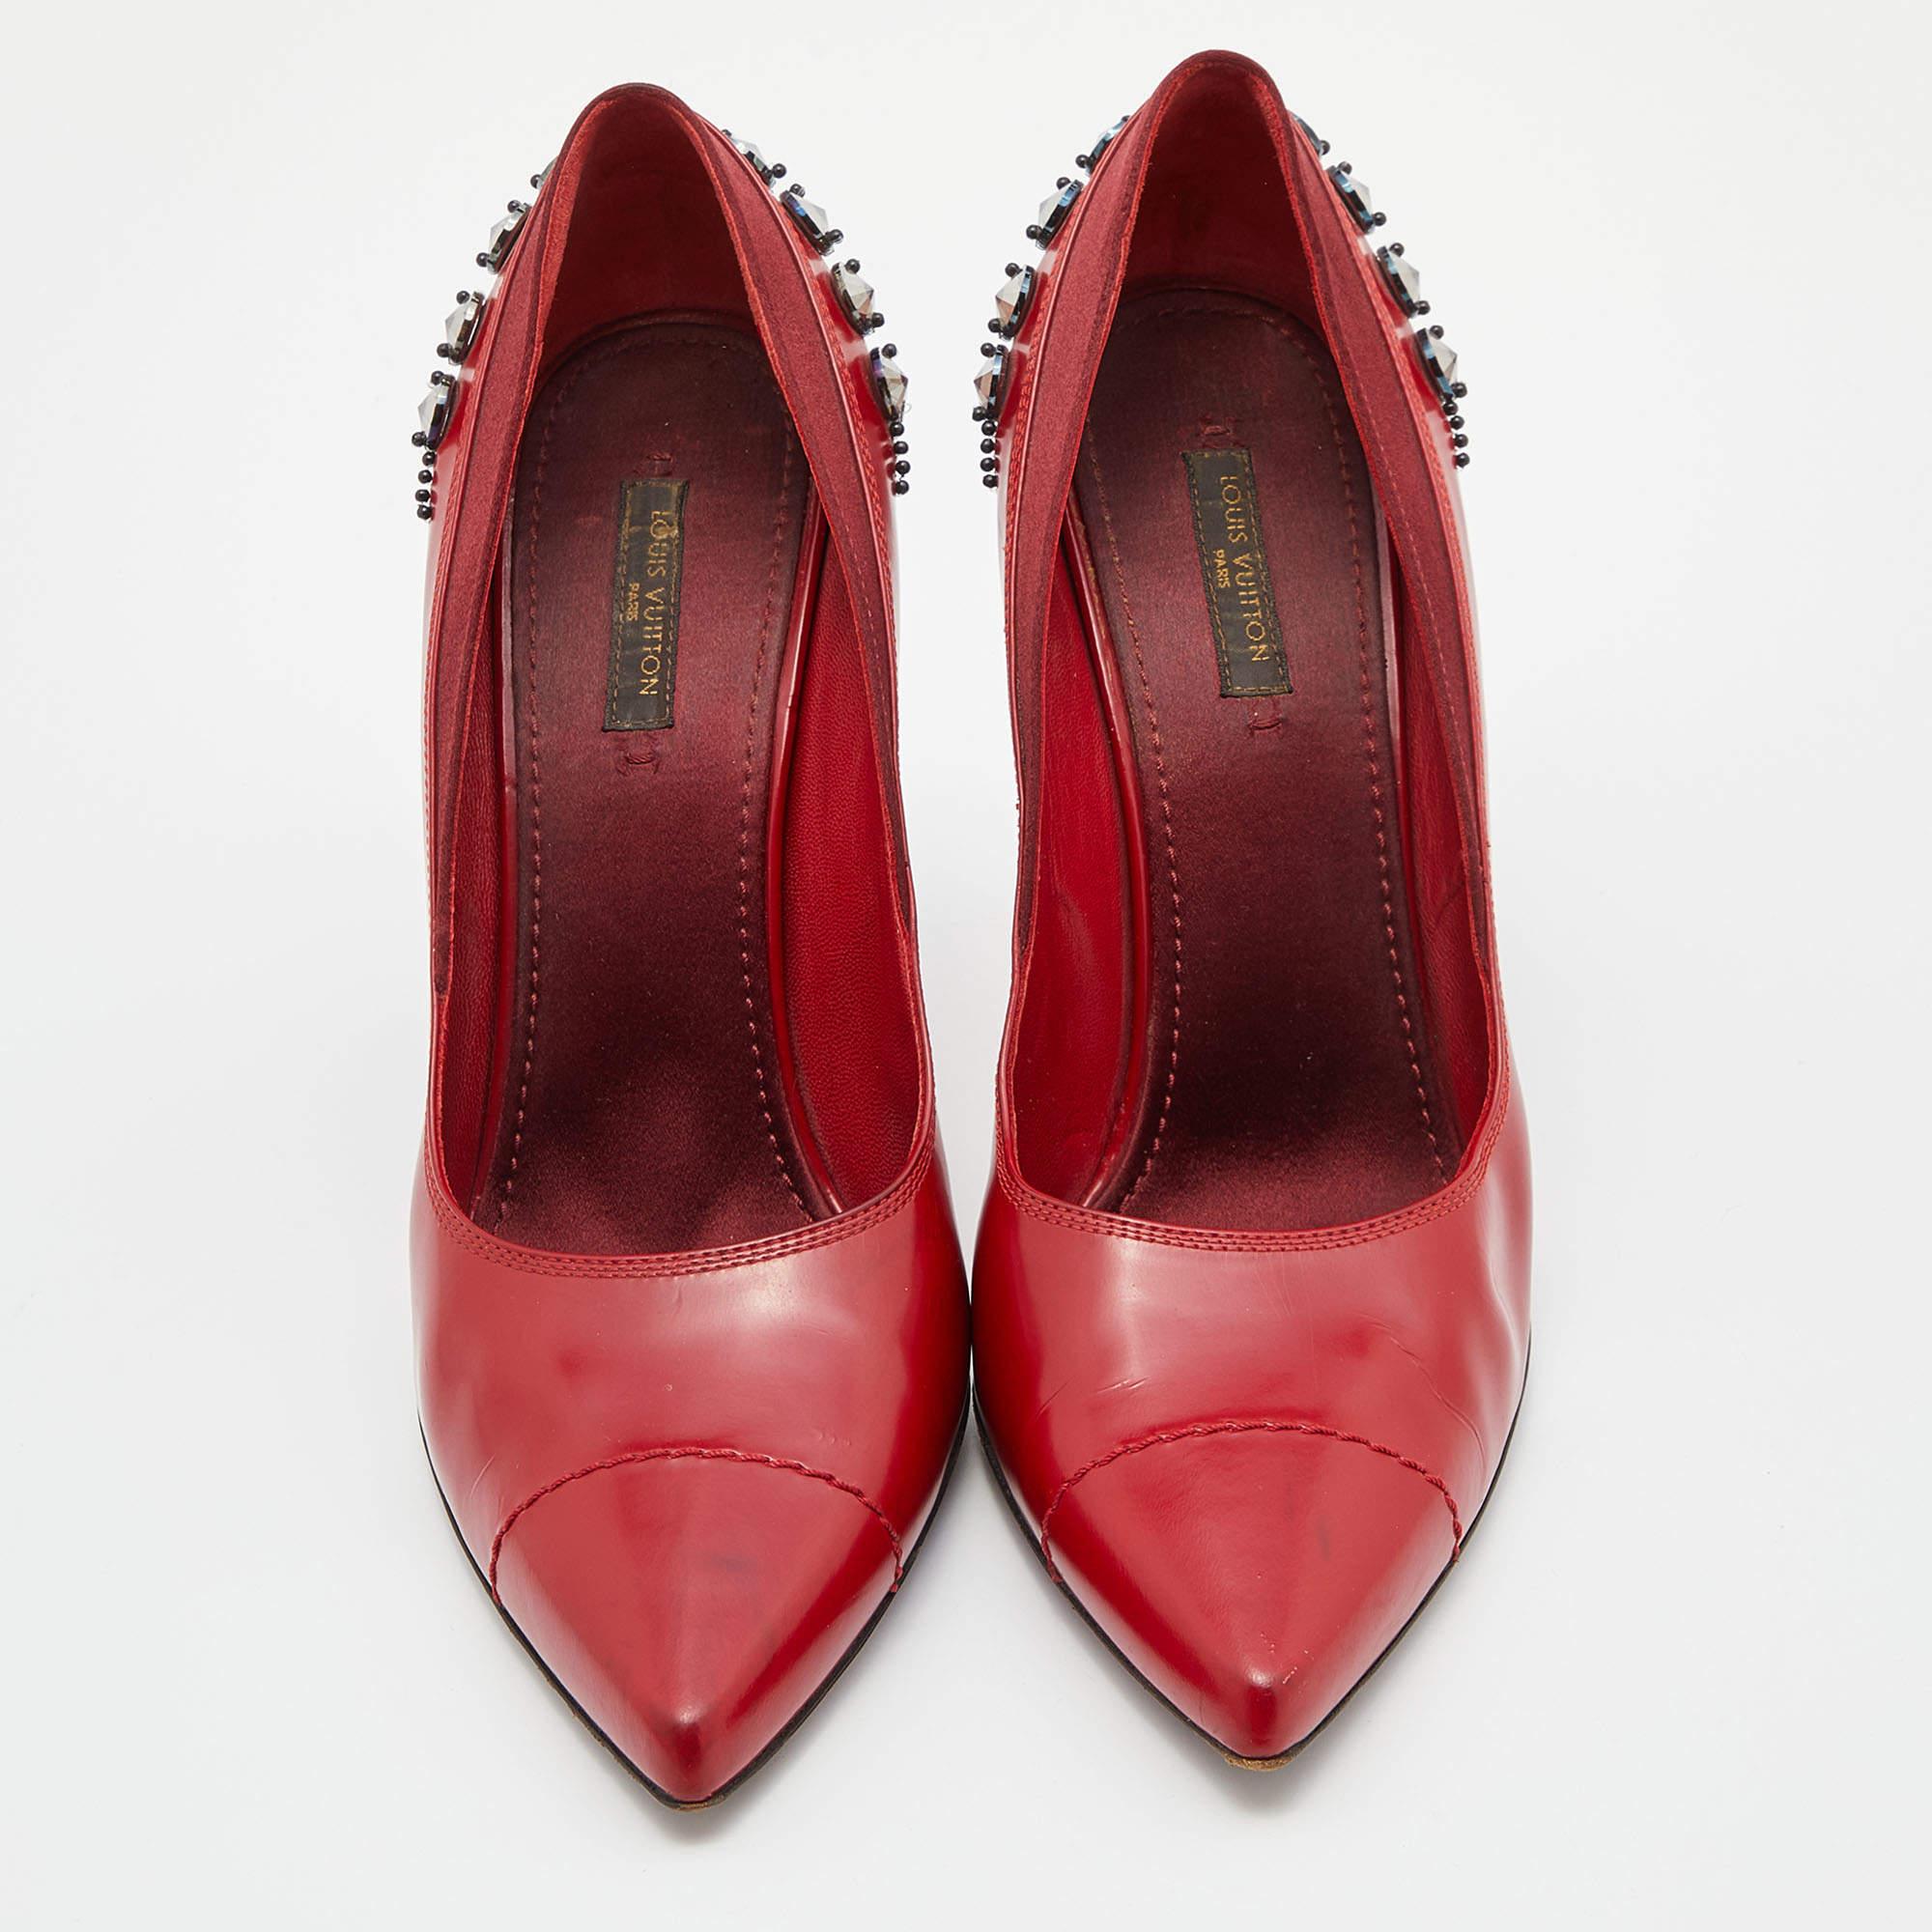 Louis Vuitton Red Leather and Satin Crystal Embellished Pumps Size 39 In Good Condition For Sale In Dubai, Al Qouz 2